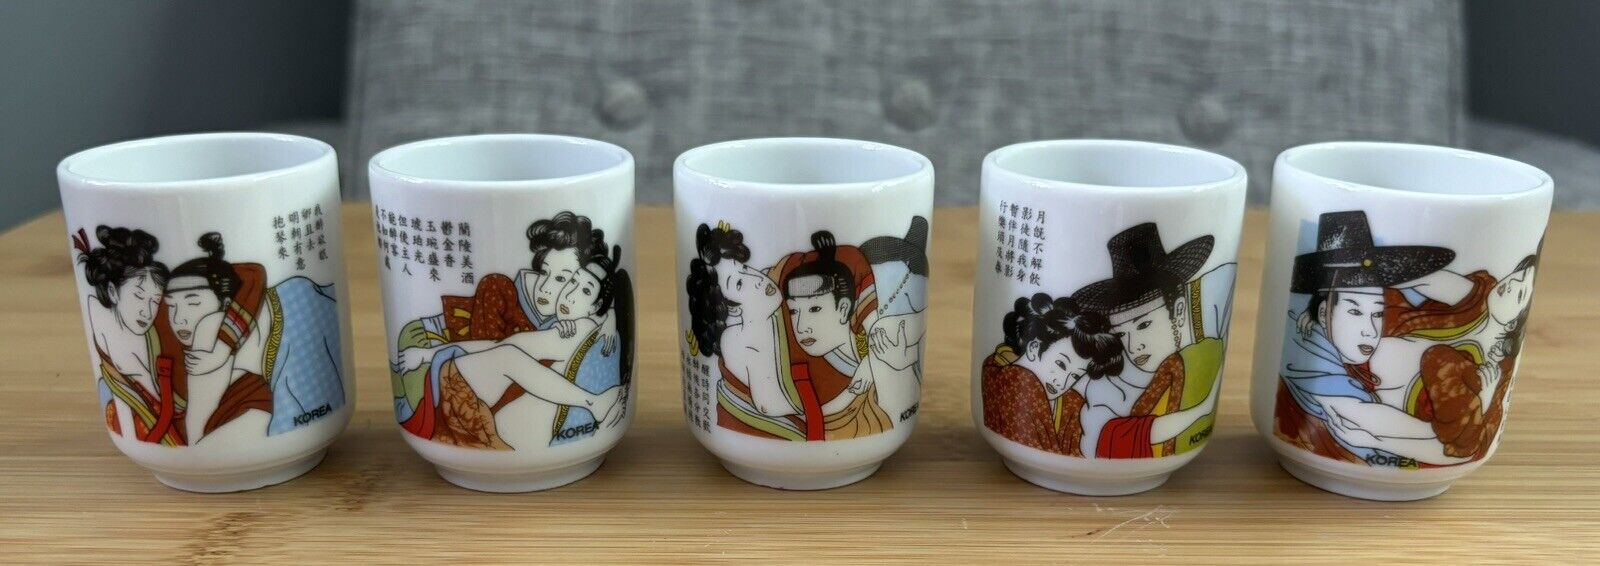 Exotic Cups In Box Japanese Shunga Sake Cups with Kama Sutra Erotic Scenes Set 5